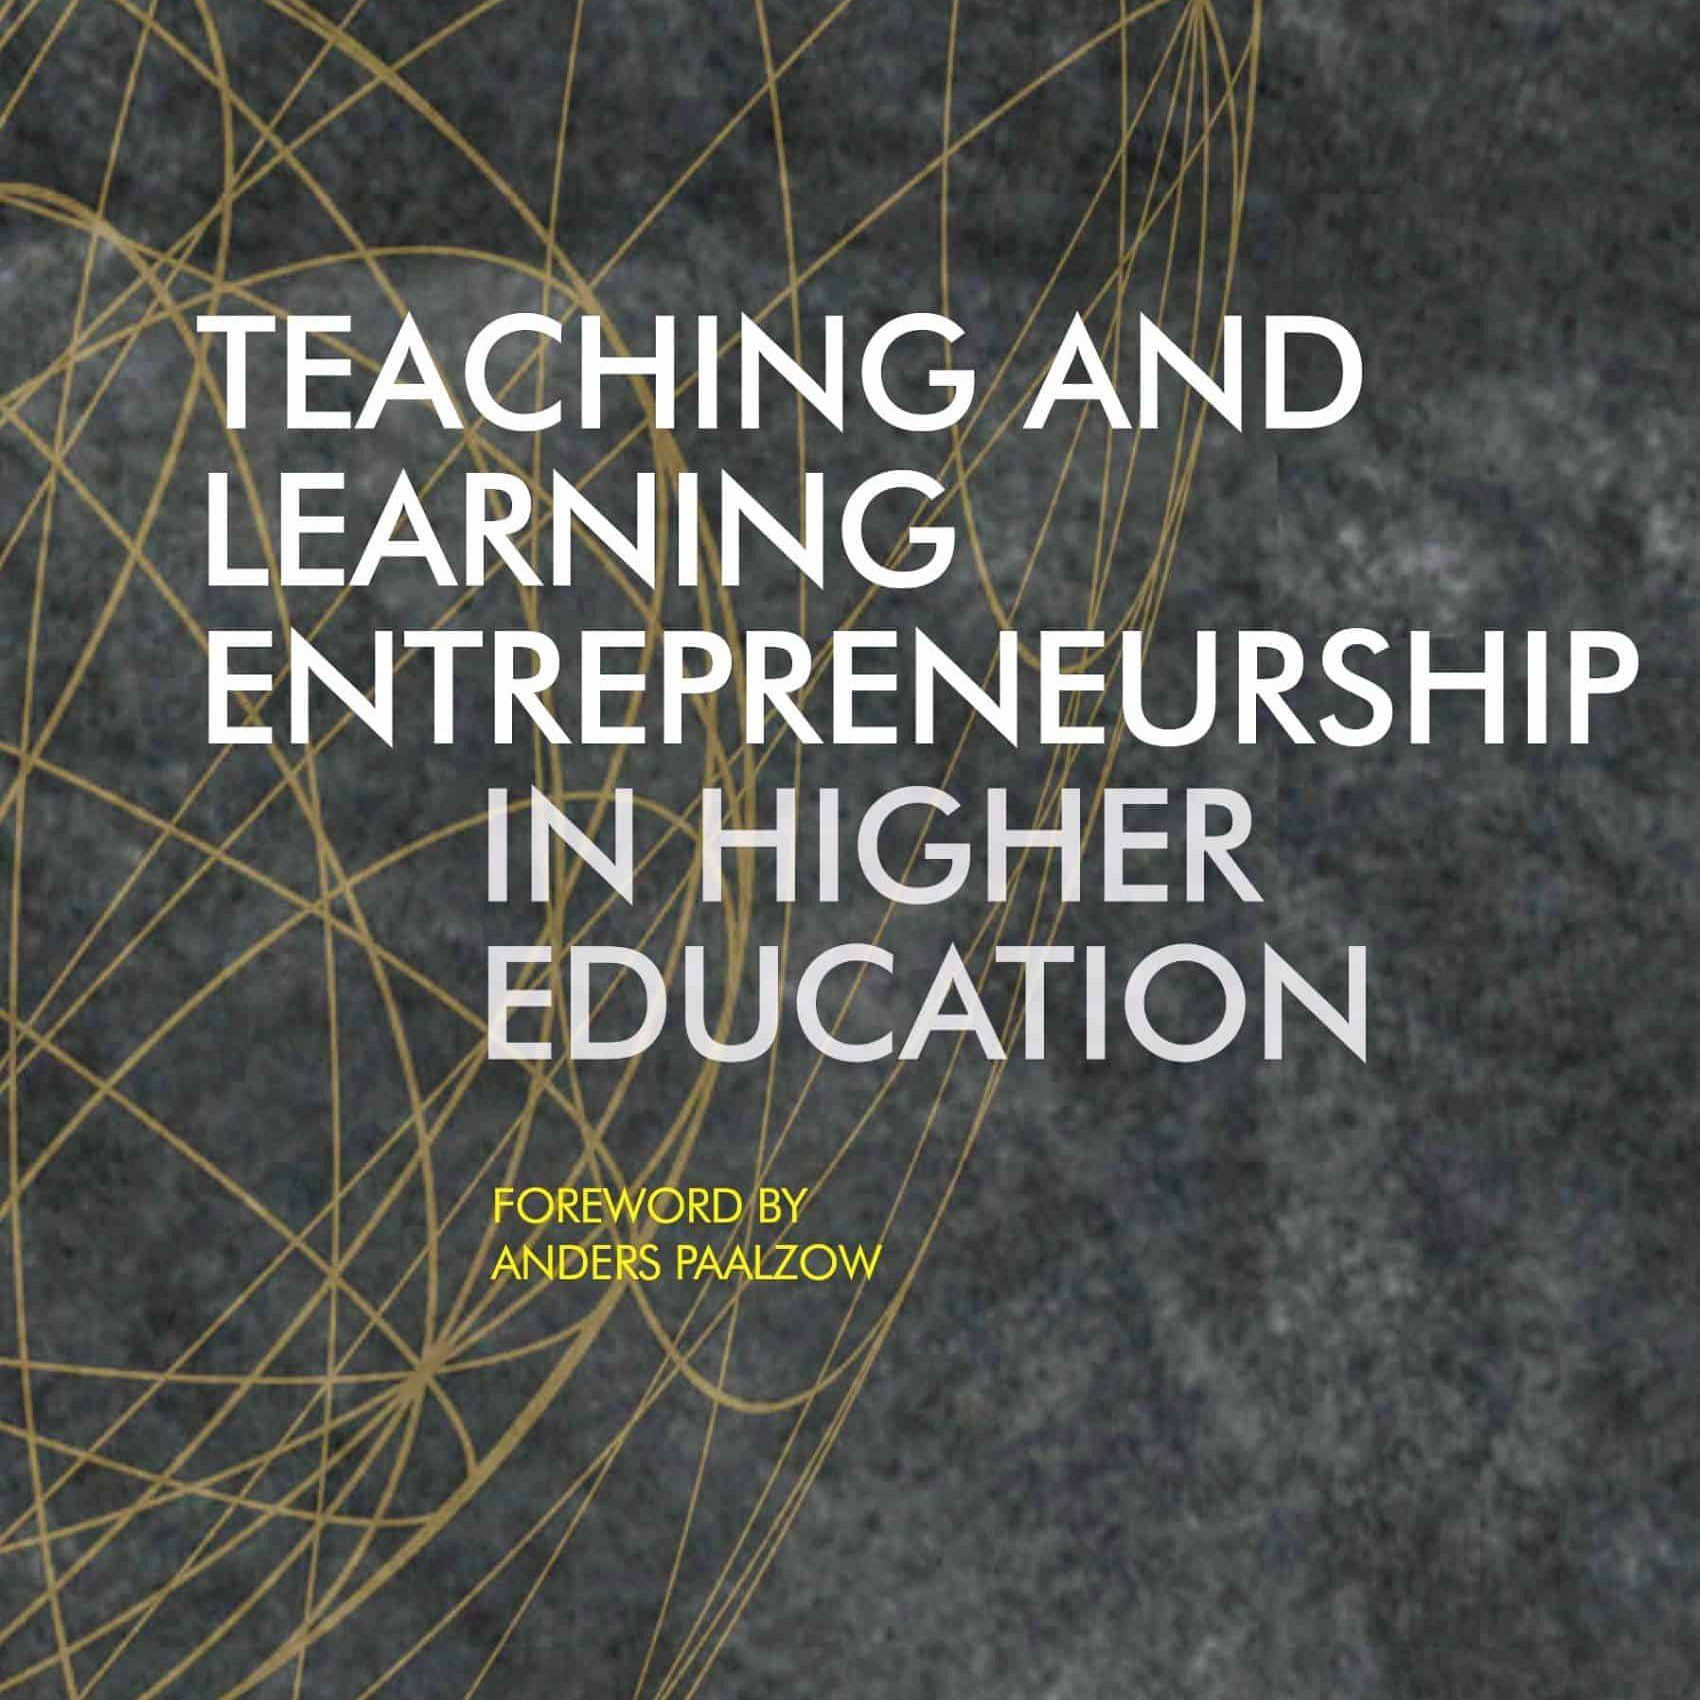 Teaching and Learning Entrepreneurship in Higher Education (2017) - John Branch - Anne Hørsted - Claus Nygaard - Anders Paalzow - SSERiga - Stockholm School of Economics Riga - Institute for Learning in Higher Education - Libri Publishing Ltd